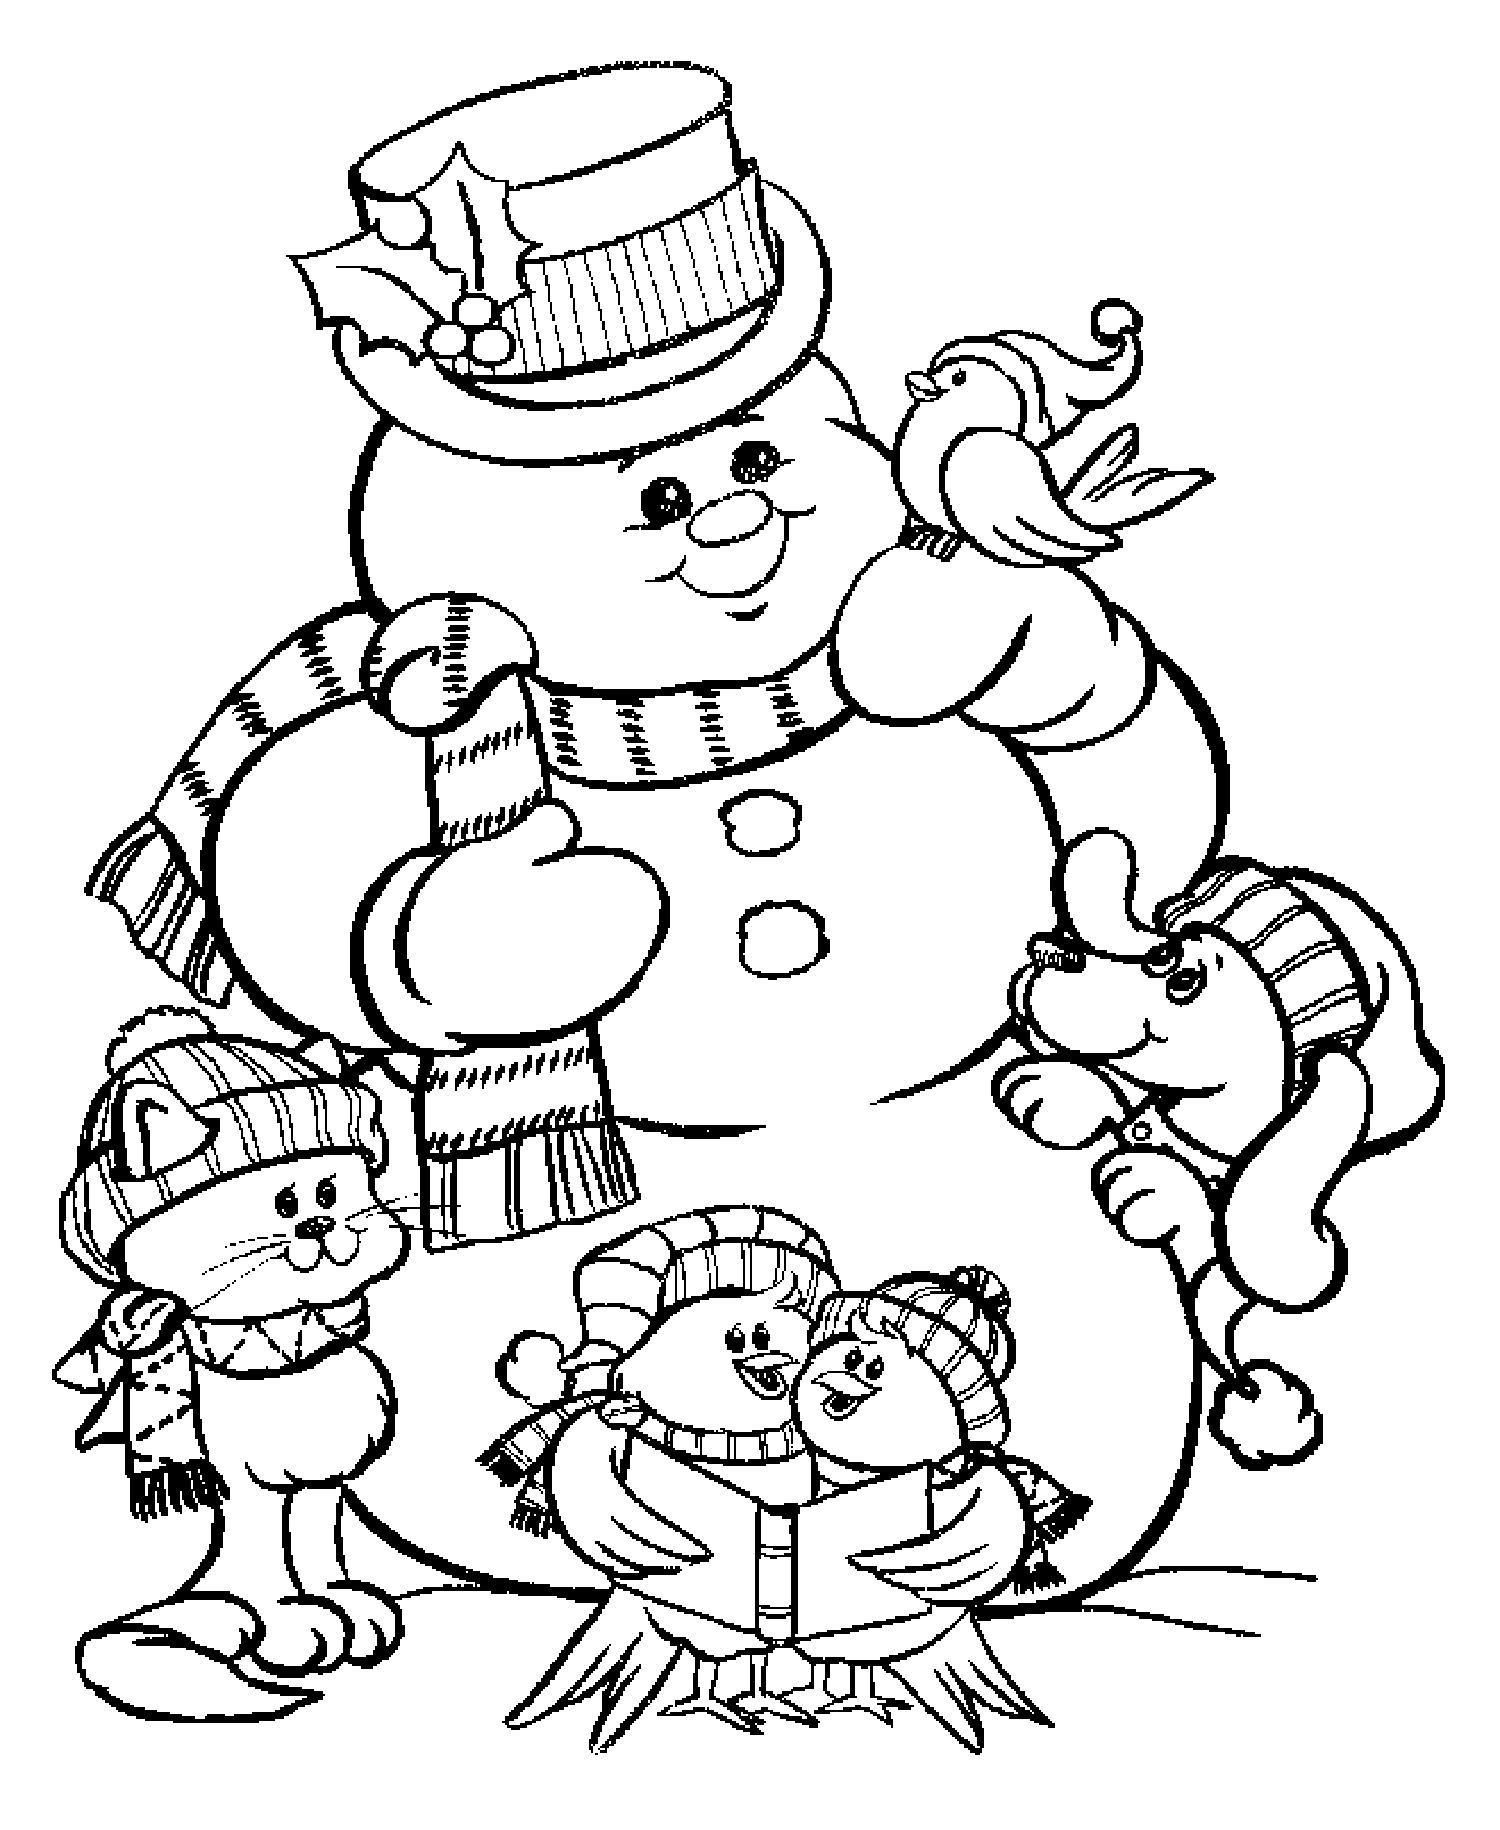 Snowman Christmas Coloring pages for kids to print & color